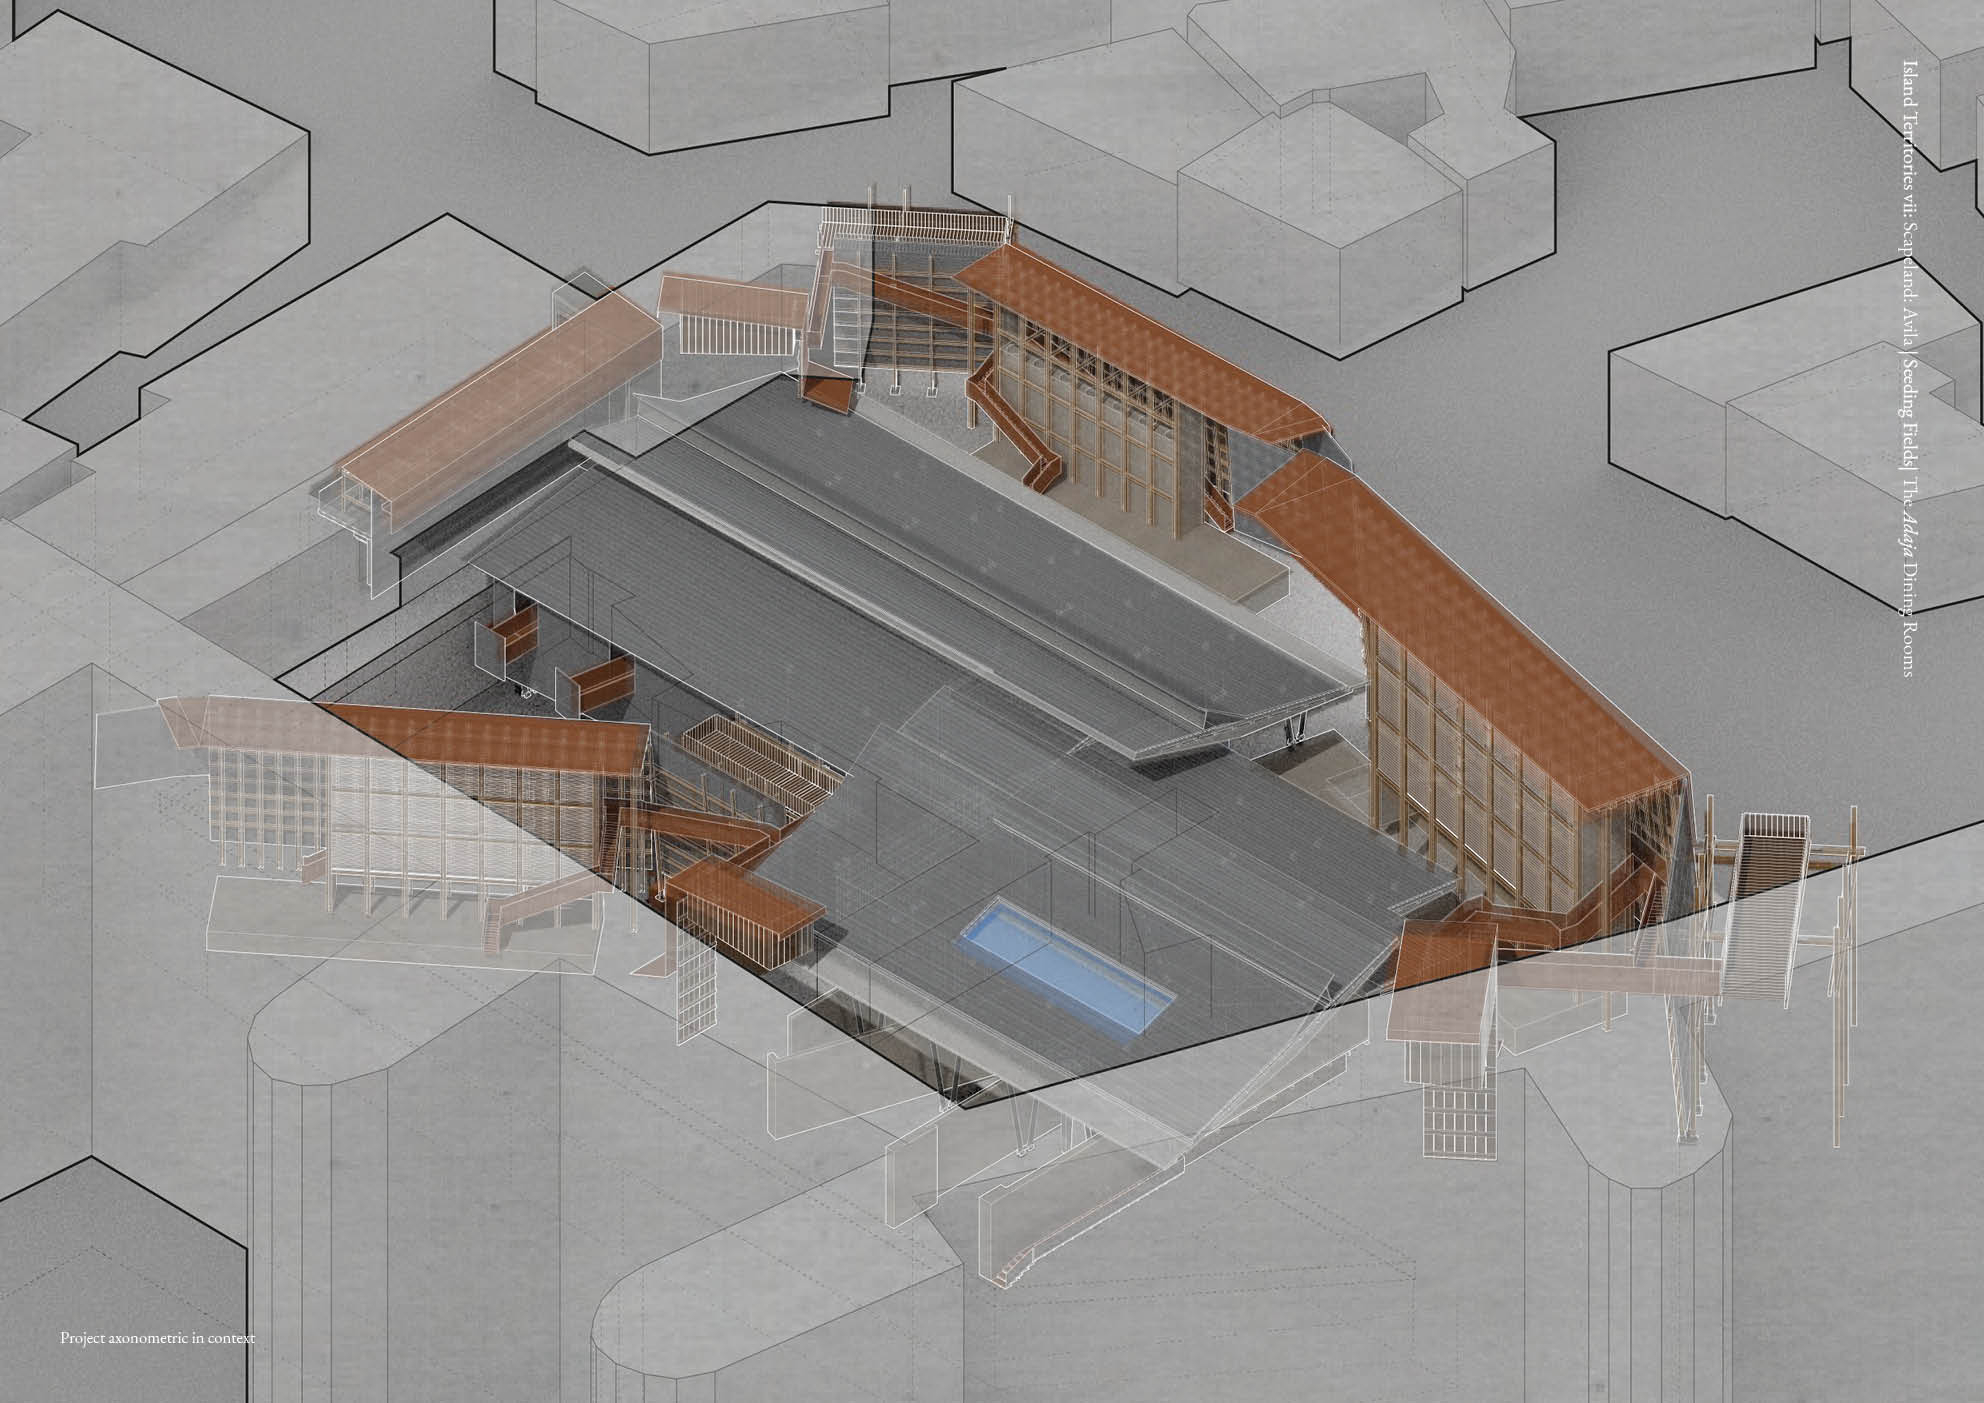 Axonometric of the project in situ